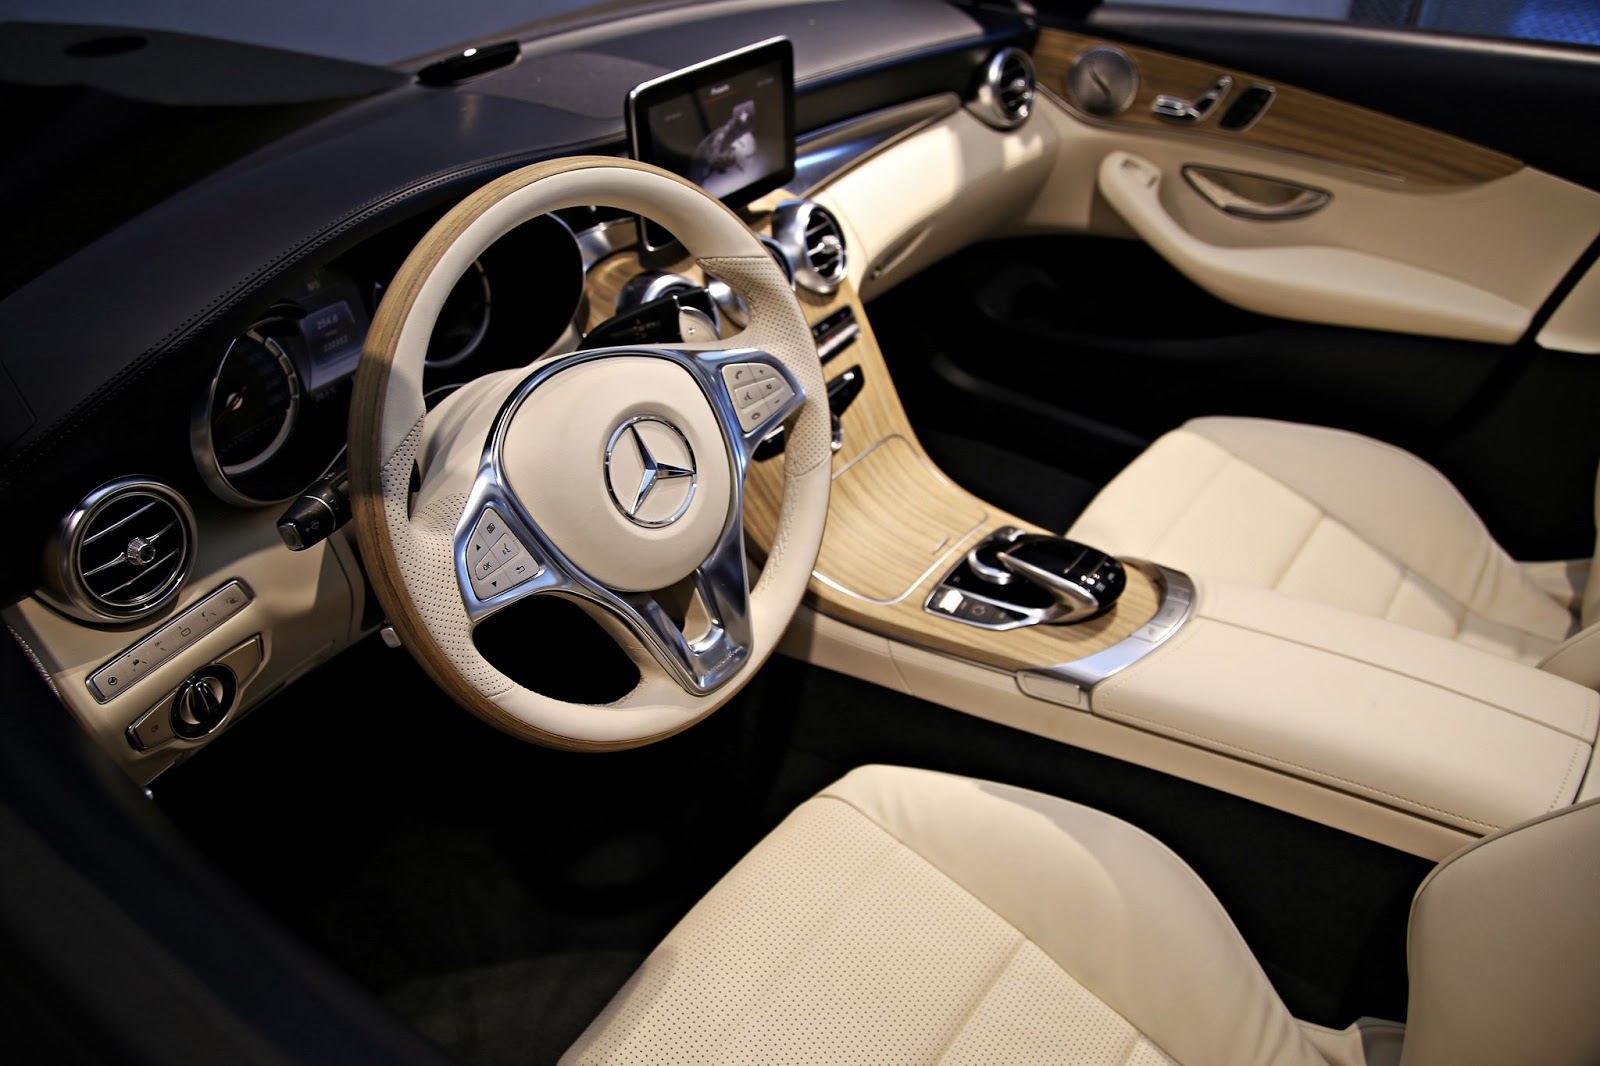 2016 Mercedes Benz C Class Cabriolet Shows Its Interior In